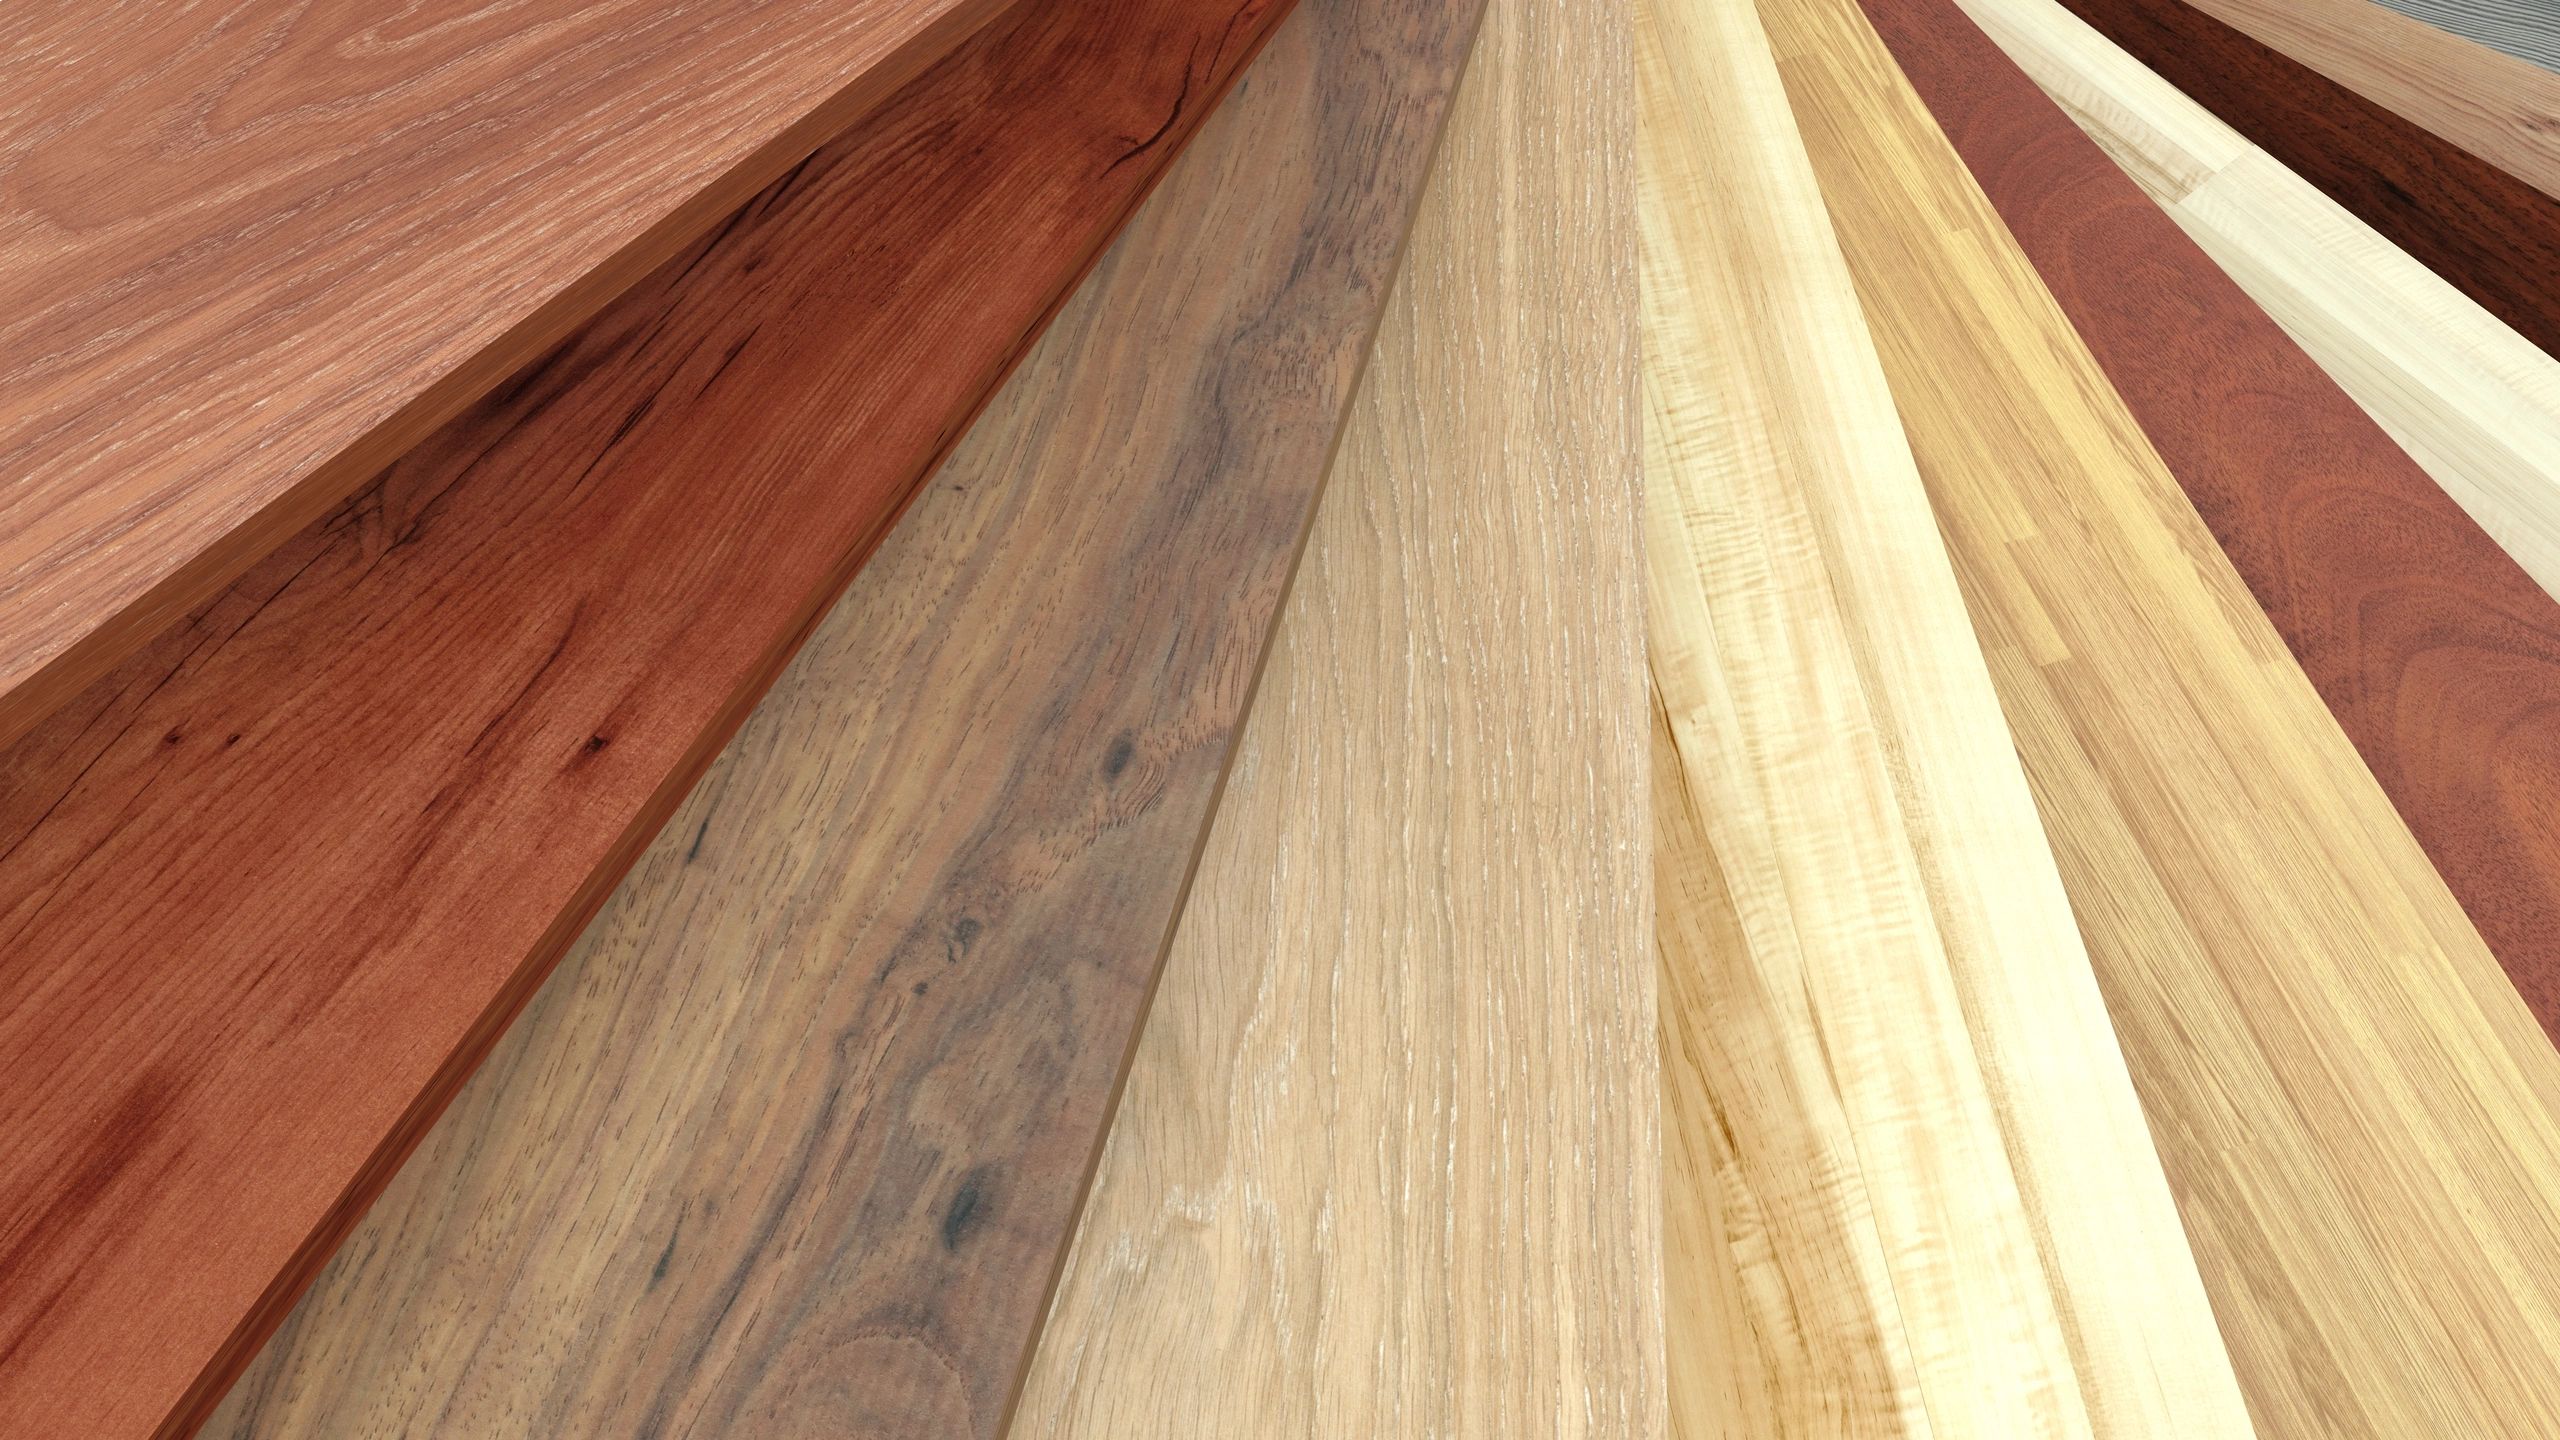 A close up of different types of wood